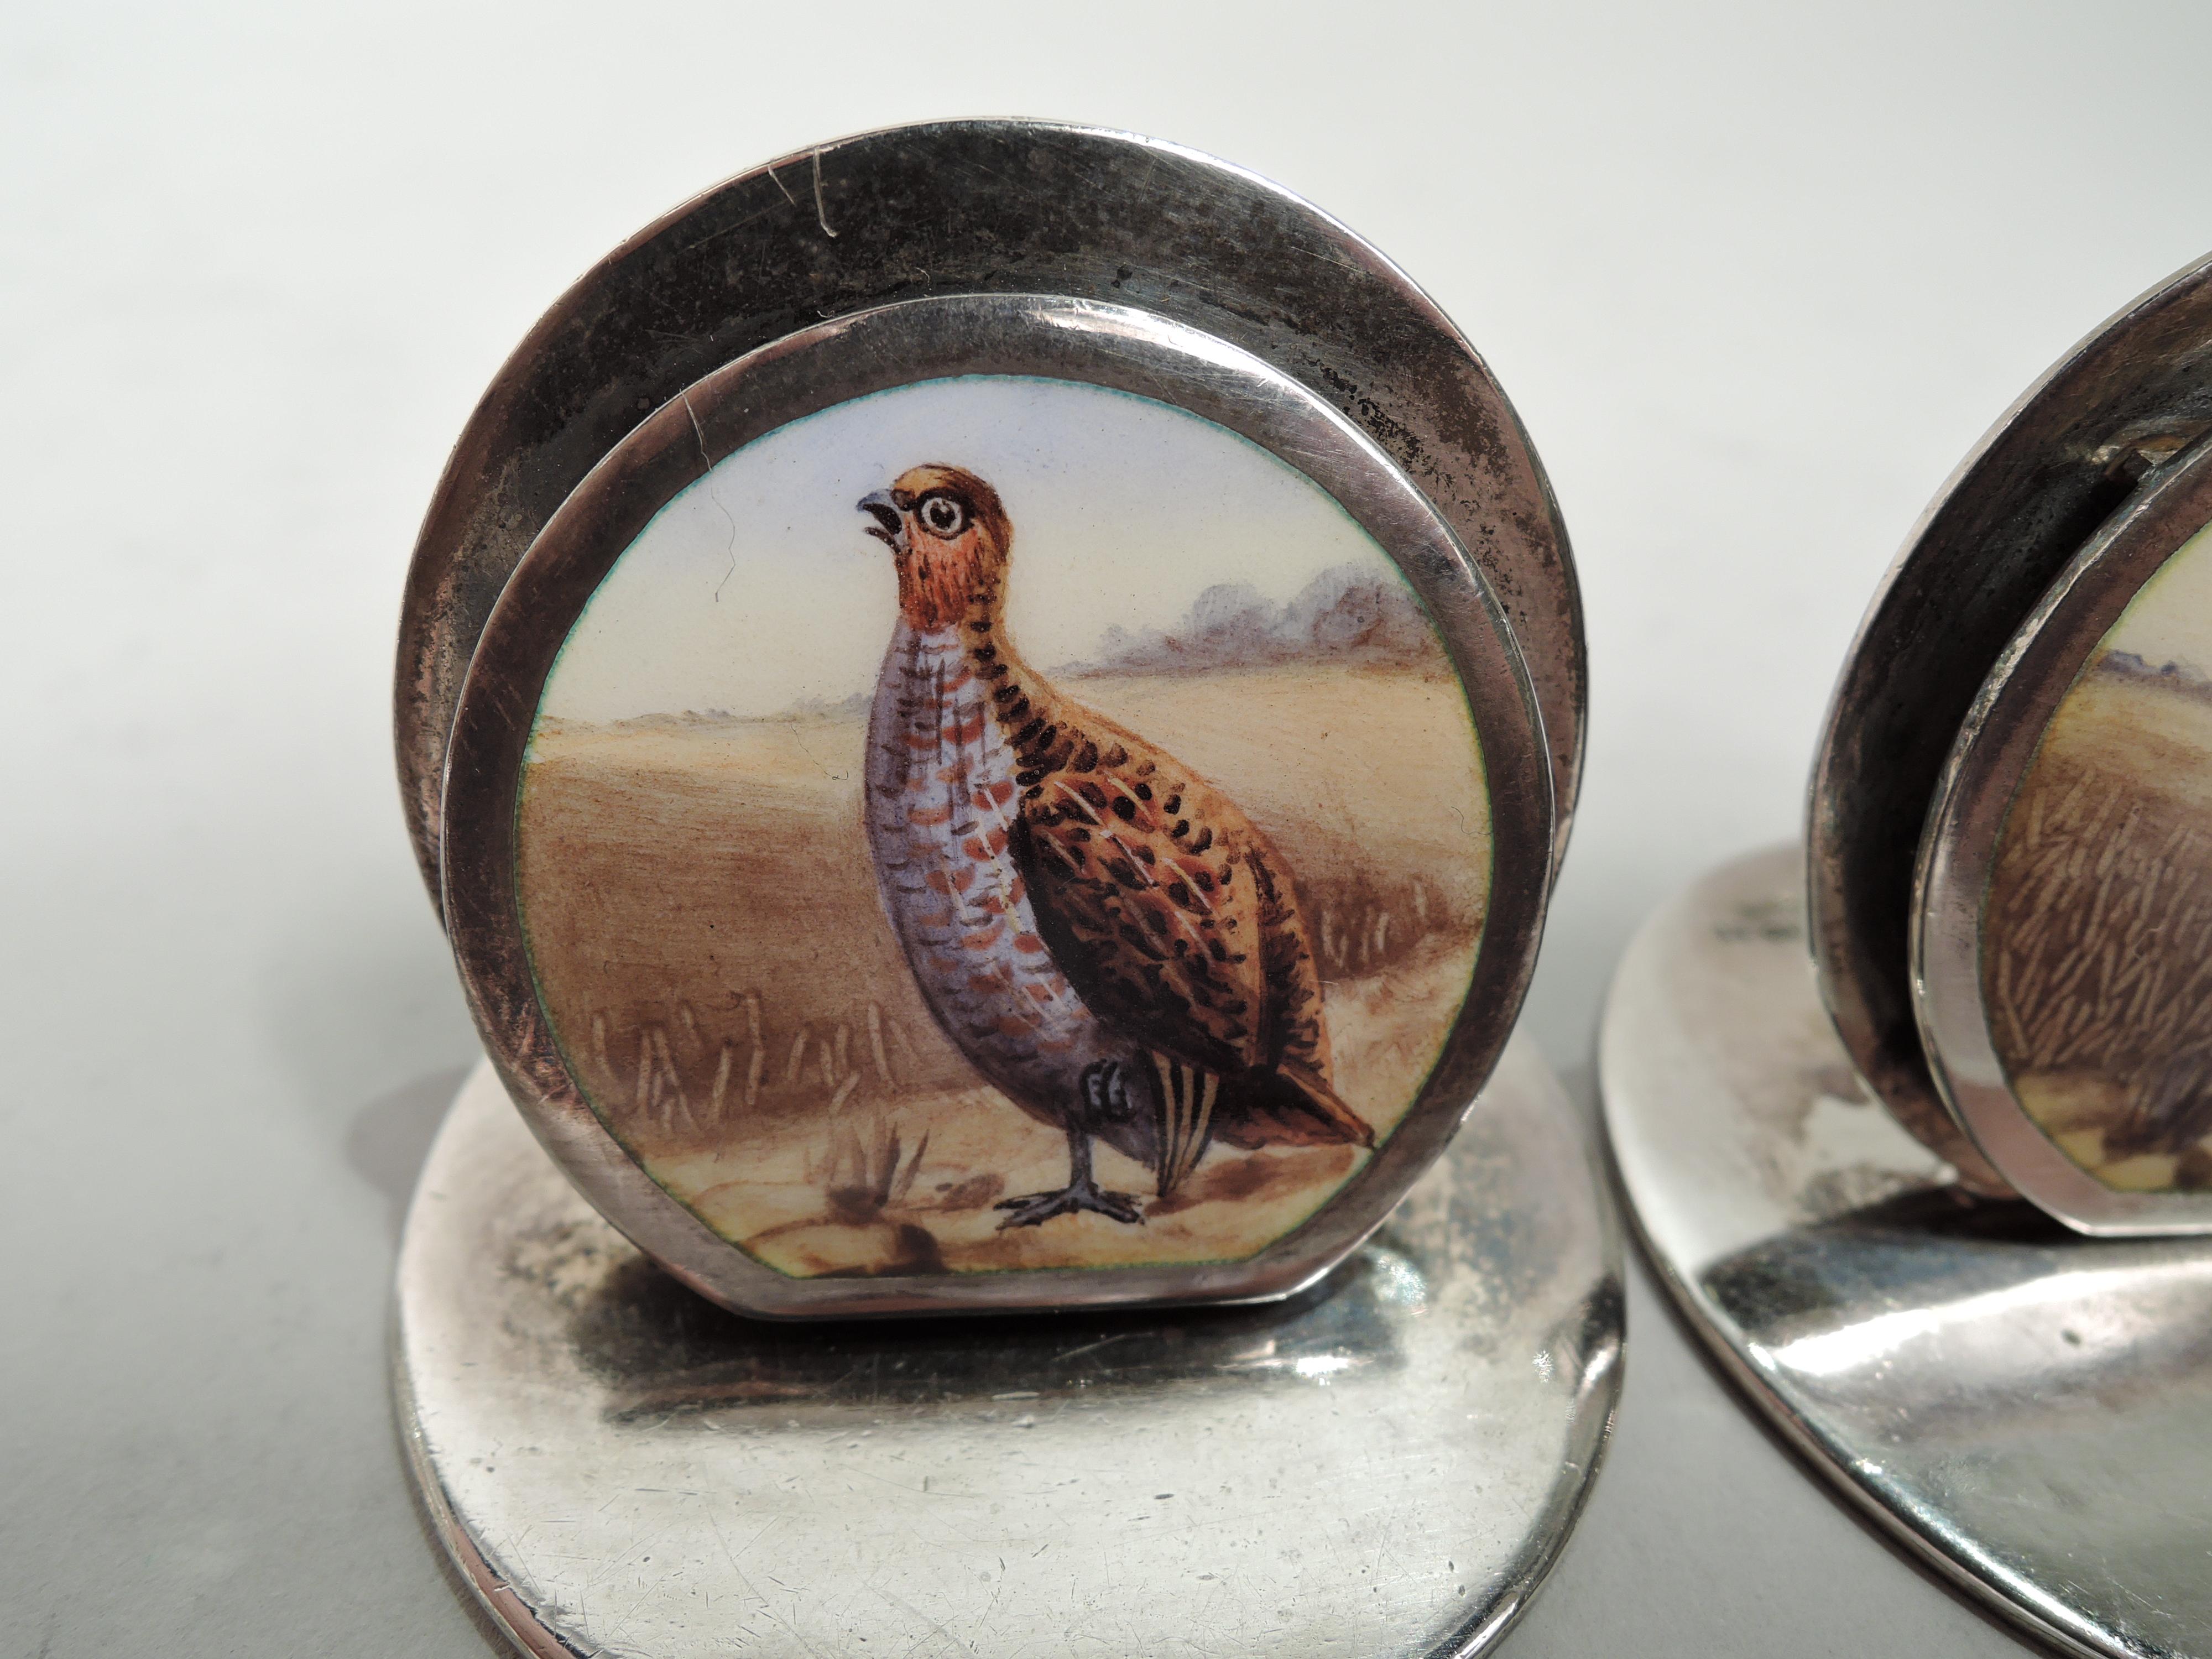 Set of 5 Edwardian sterling silver and enamel place card holders. Made by Sampson Mordan in Chester, 1904-8. Each: Two graduated discs of which the front decorated with grouse standing stiffly, alert to danger; landscape background varies. Flat